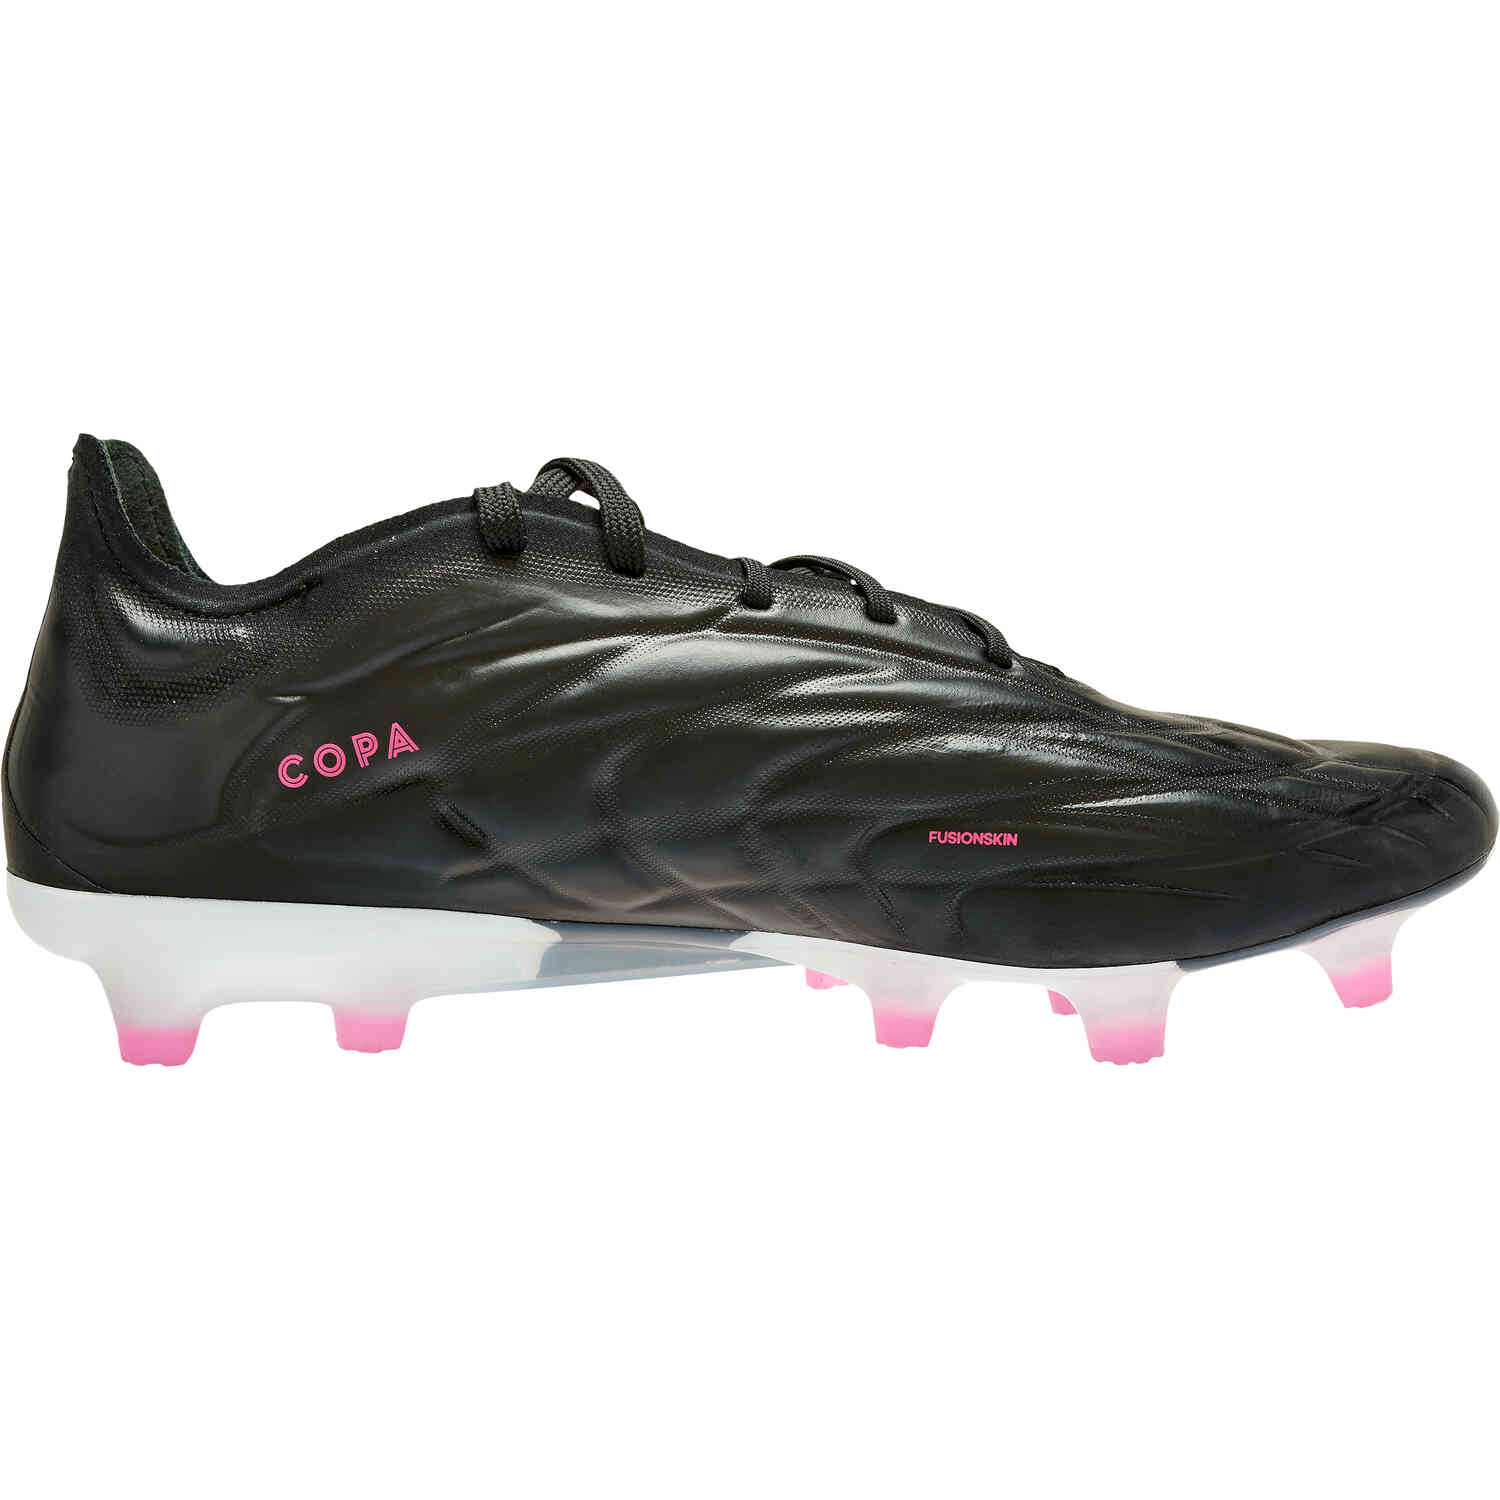 adidas Copa Pure.1 FG – Own Your Football Pack